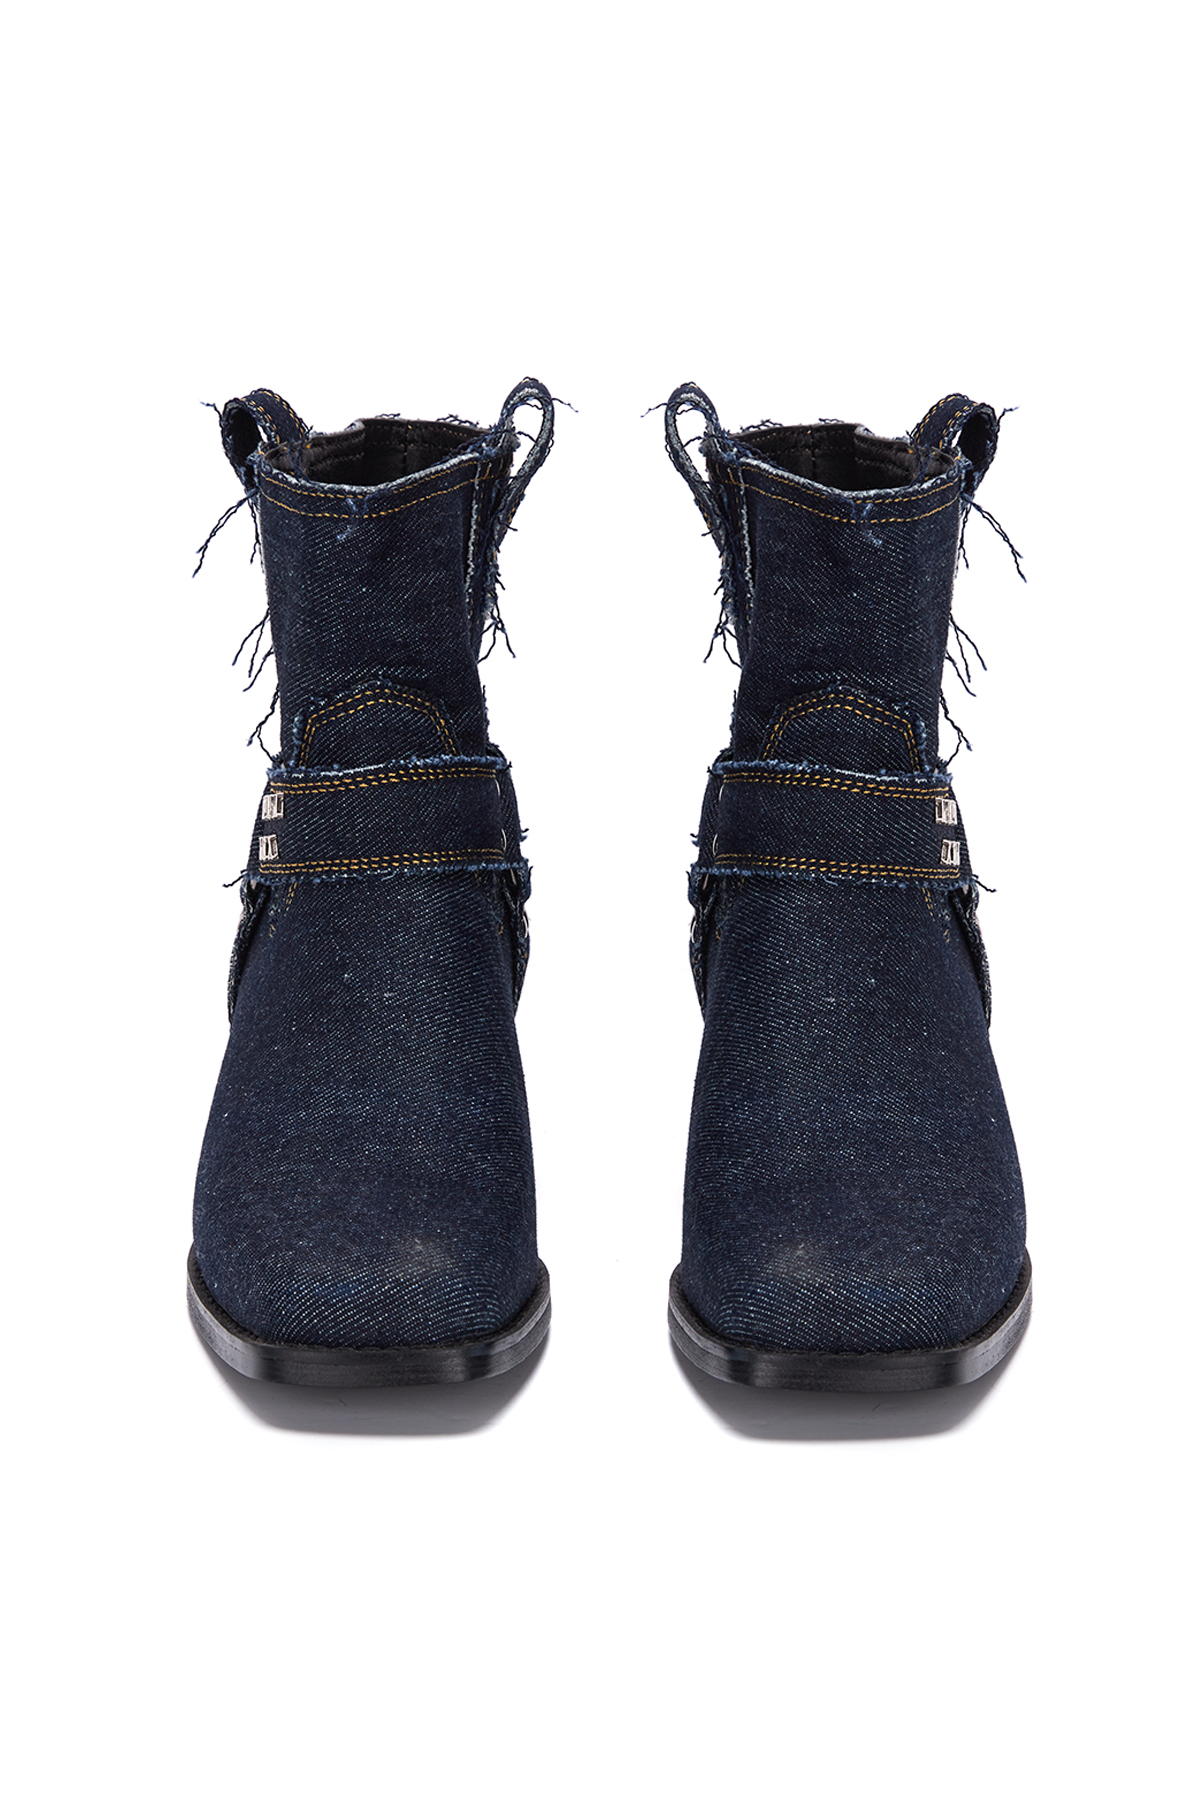 DENIM WESTERN ANKLE BOOTS IN BLUE